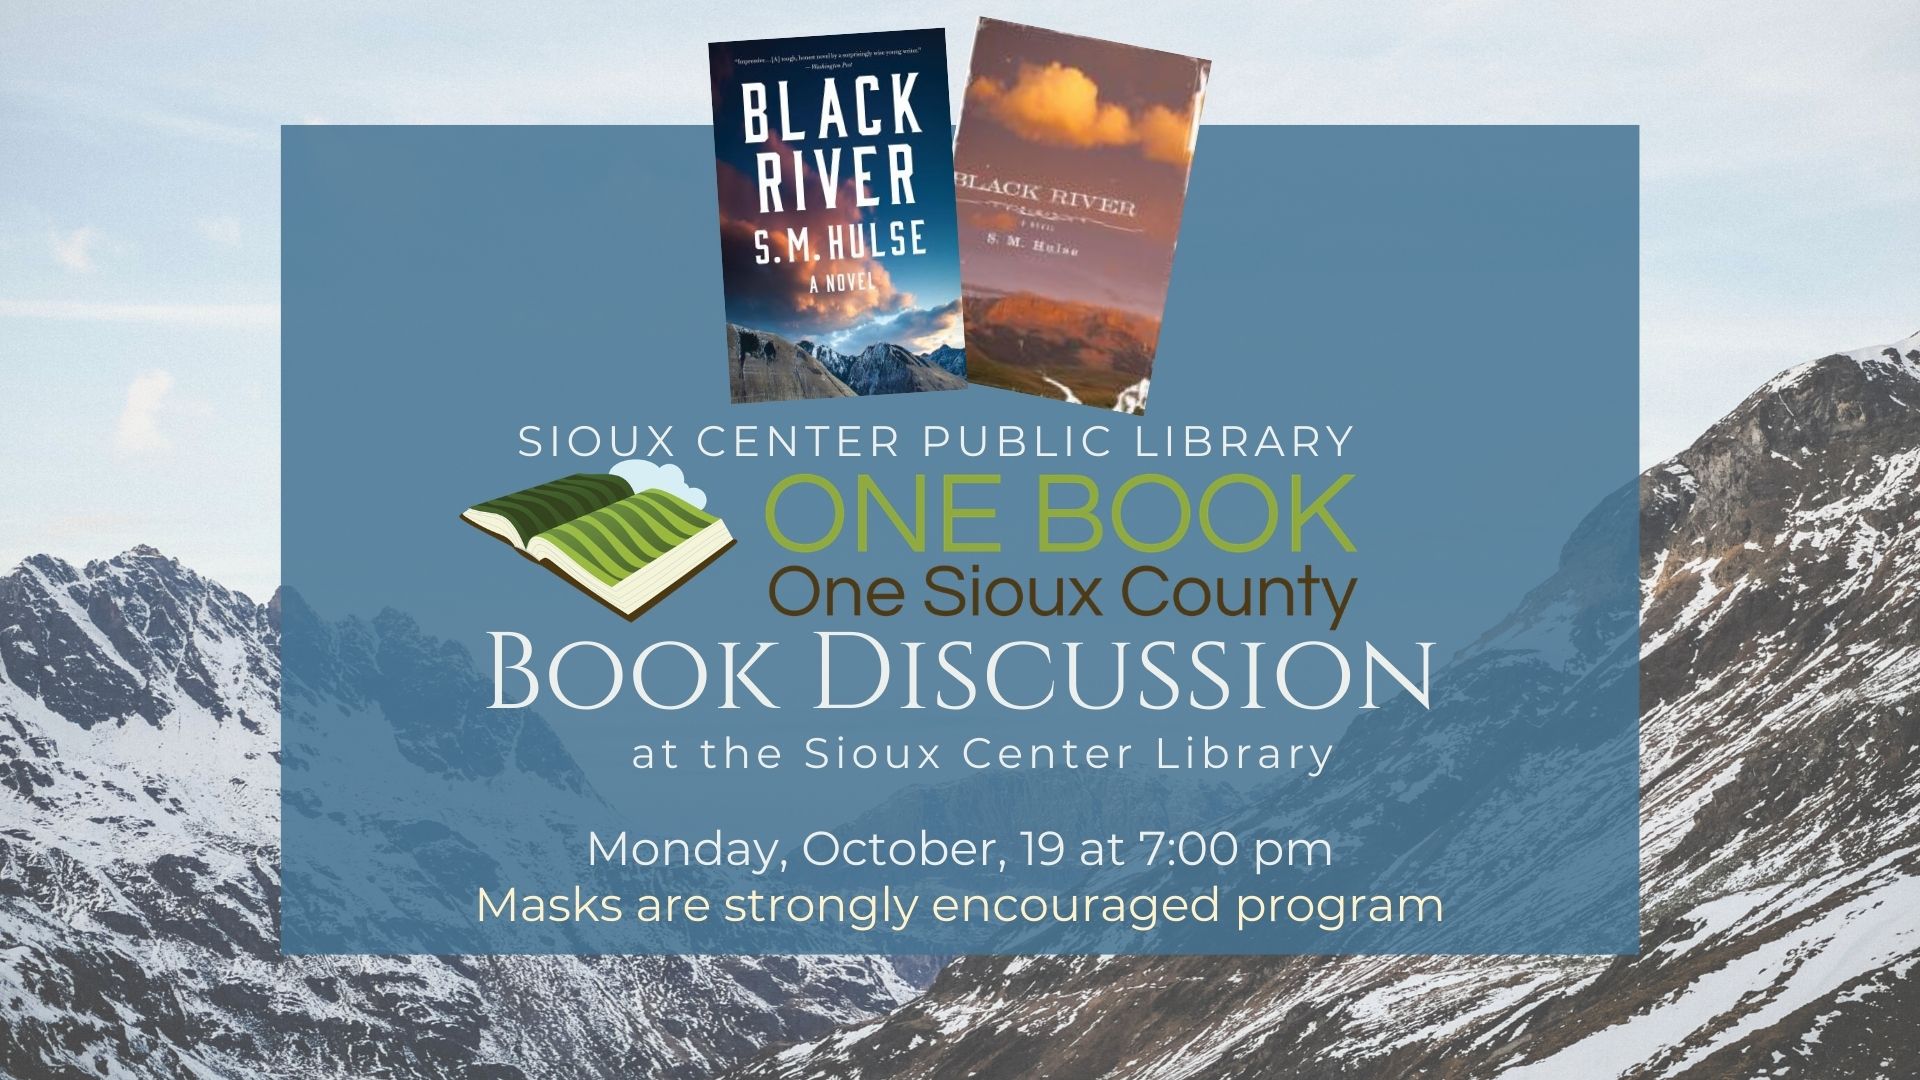 One Book One Sioux County Book Discussion